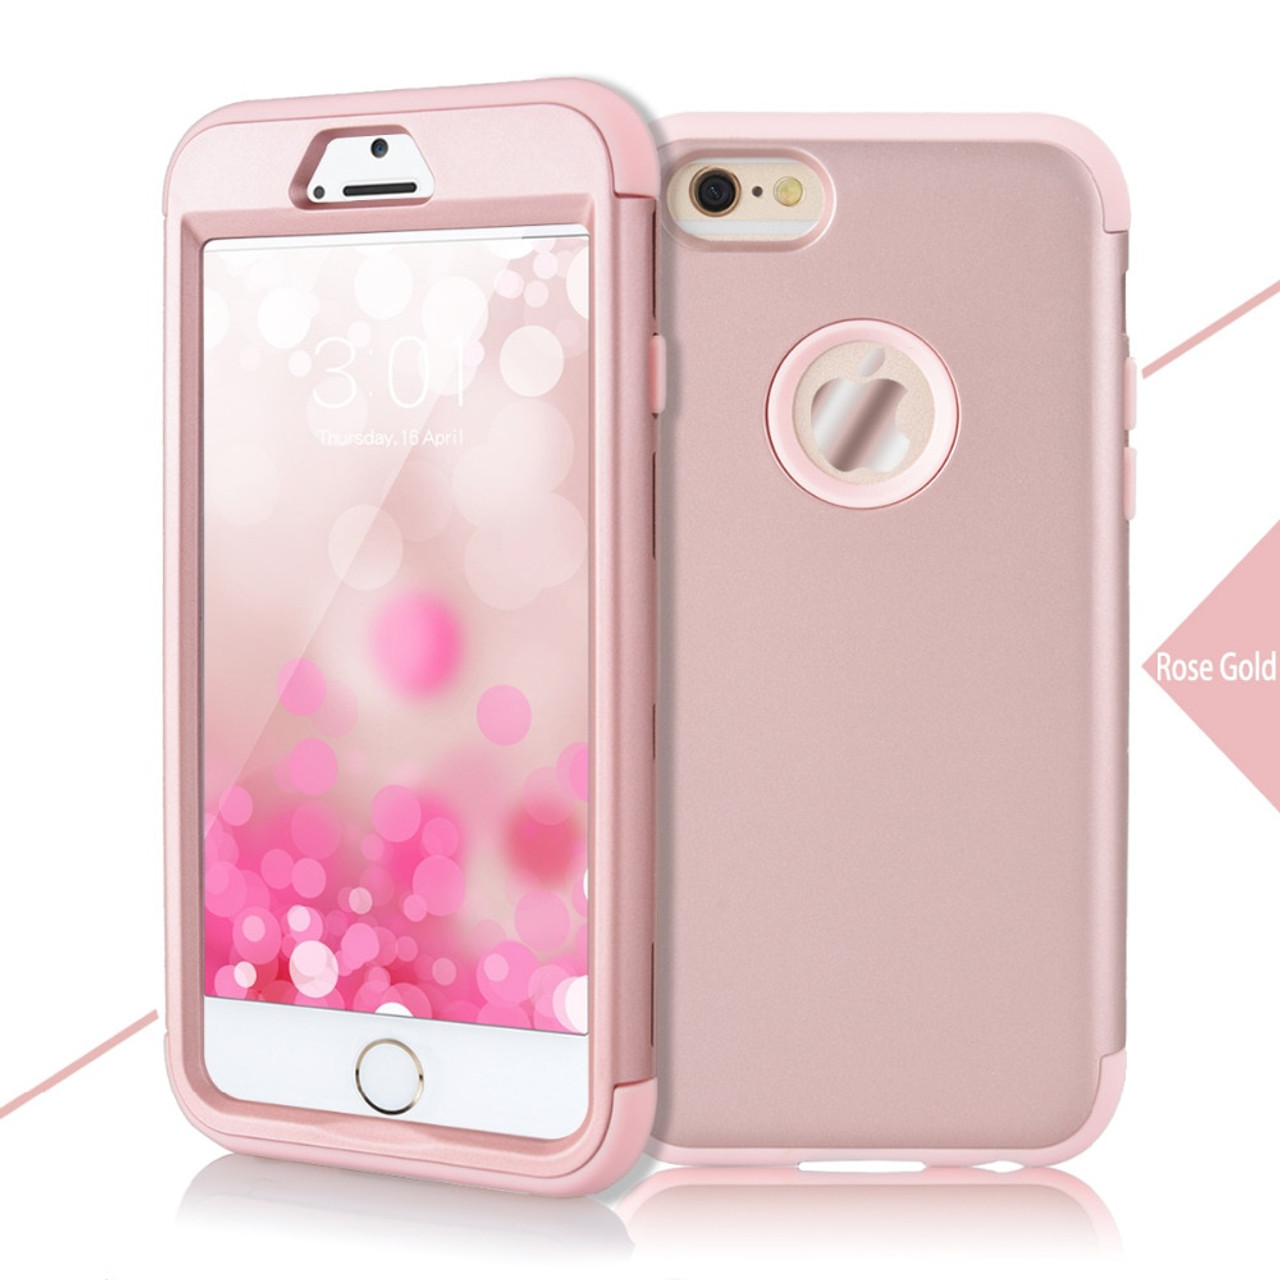 Luxury Hard Full Protect Case For Iphone 6 6s Plus Case For Iphone